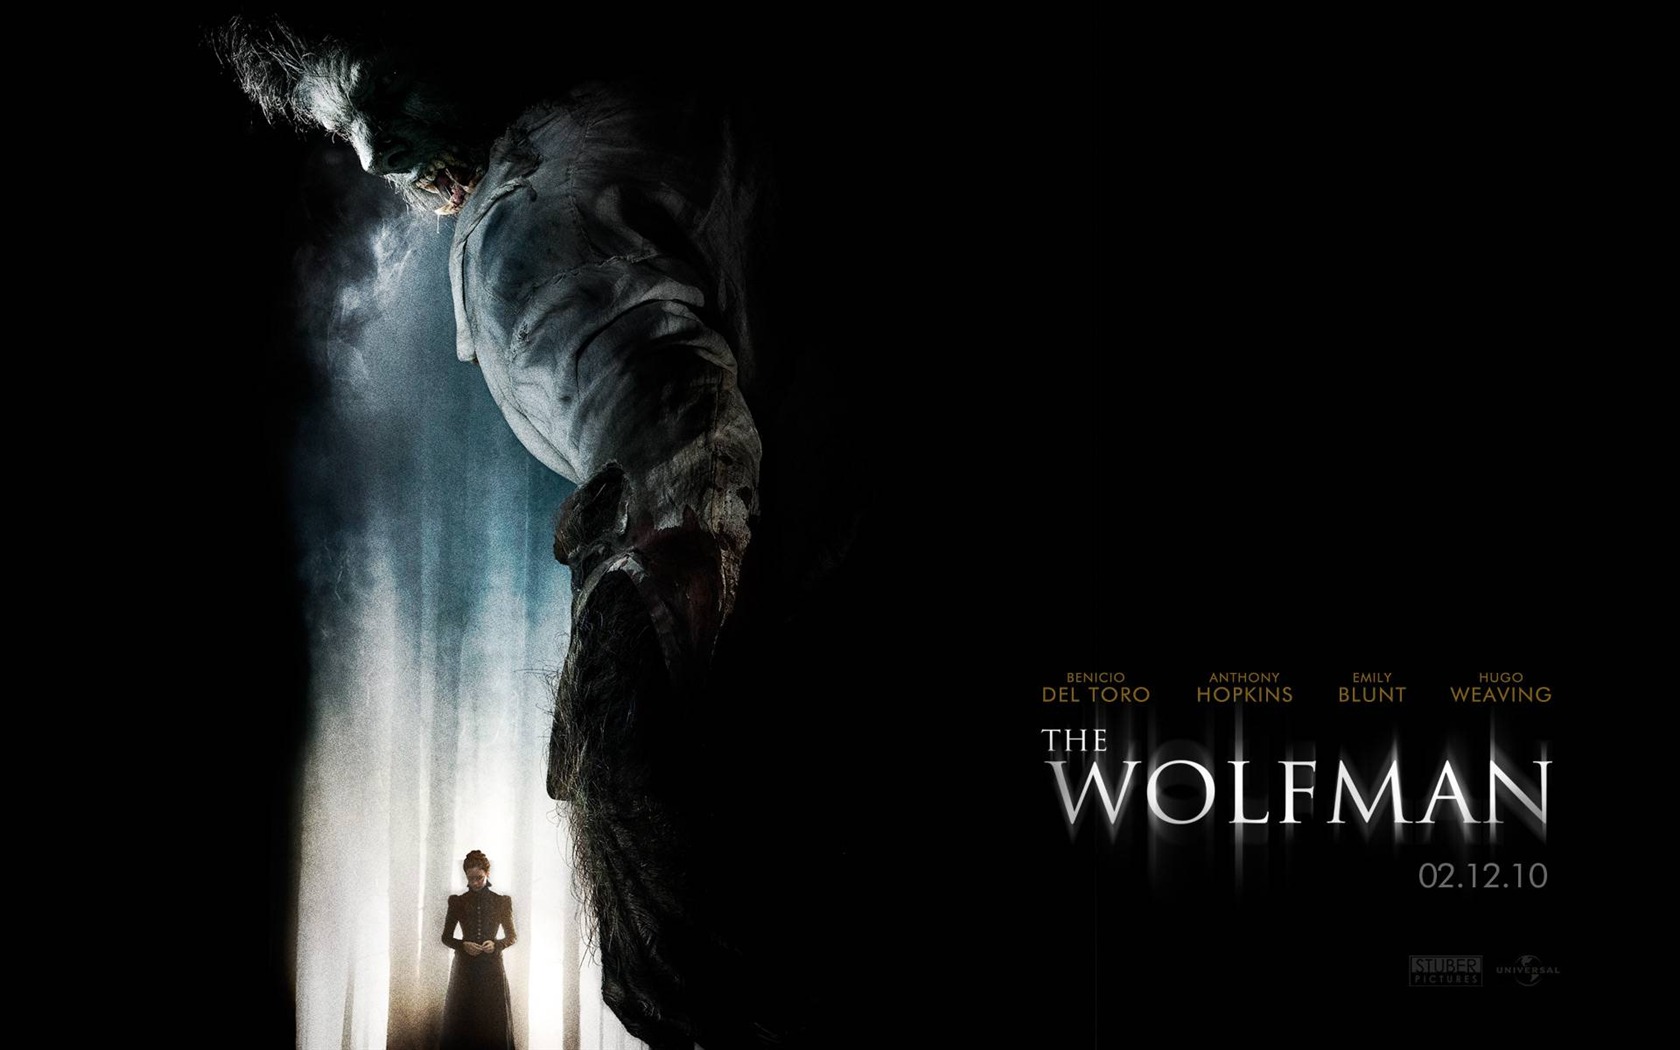 The Wolfman Movie Wallpapers #6 - 1680x1050